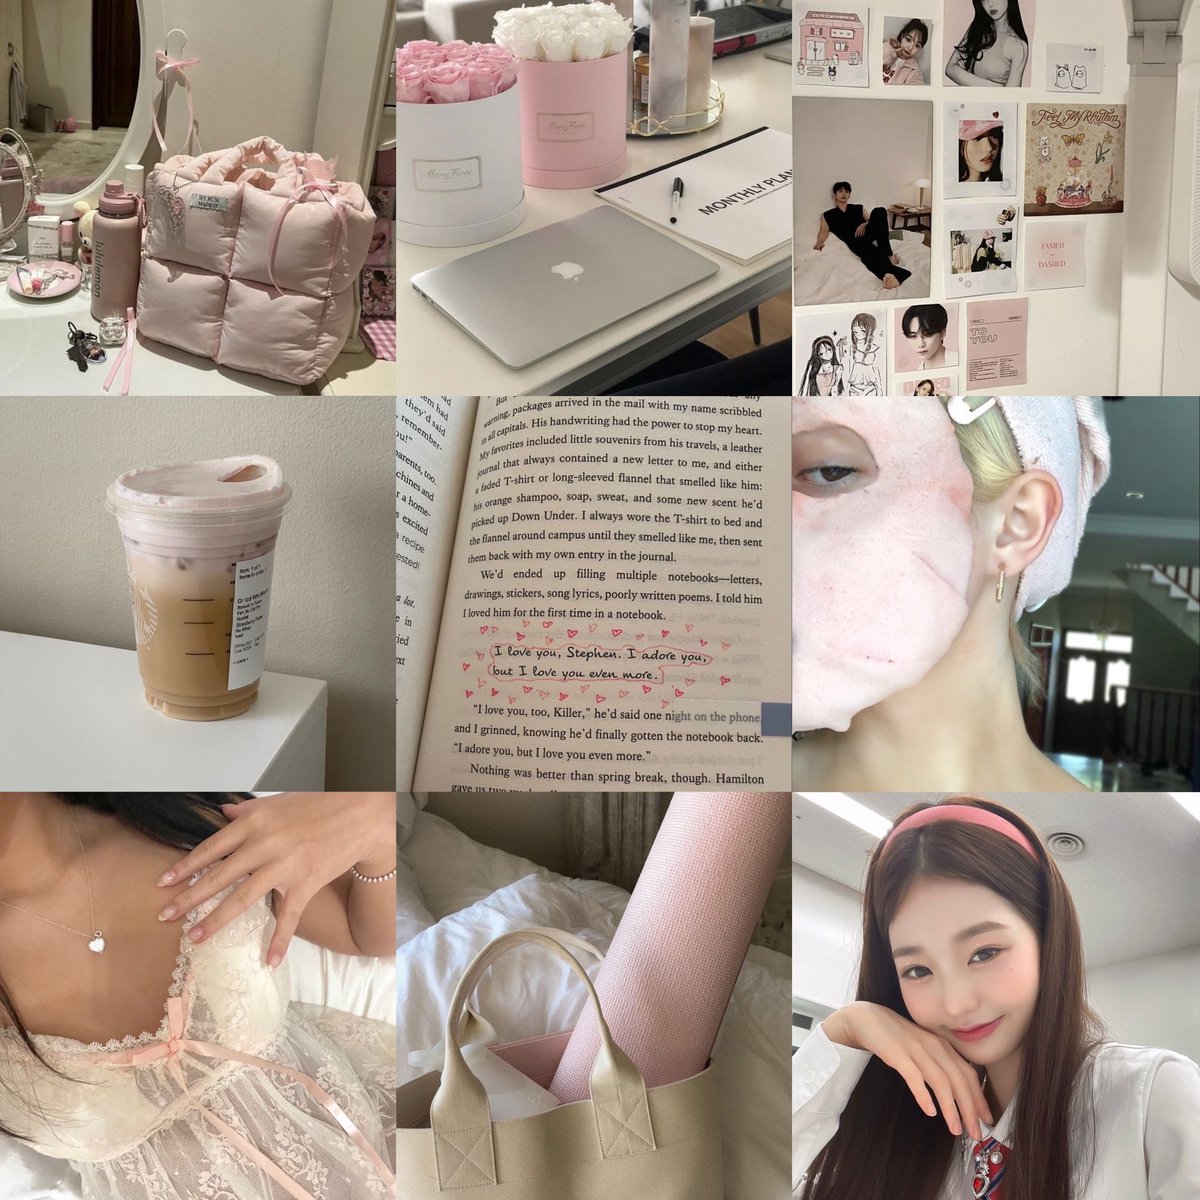 hi i’m phi, i’m new to #booktwt and looking for interactive moots ! 🐚 ₊˚⊹

♡ — she / her, leo
☆ — favs: the cruel prince, the seven husbands of evelyn hugo
☆ — current reads: tsitp series, the love hypothesis
☆ — genres: romance, fantasy

♡/↻ to be moots ૮꒰ ˶• ༝ •˶꒱ა